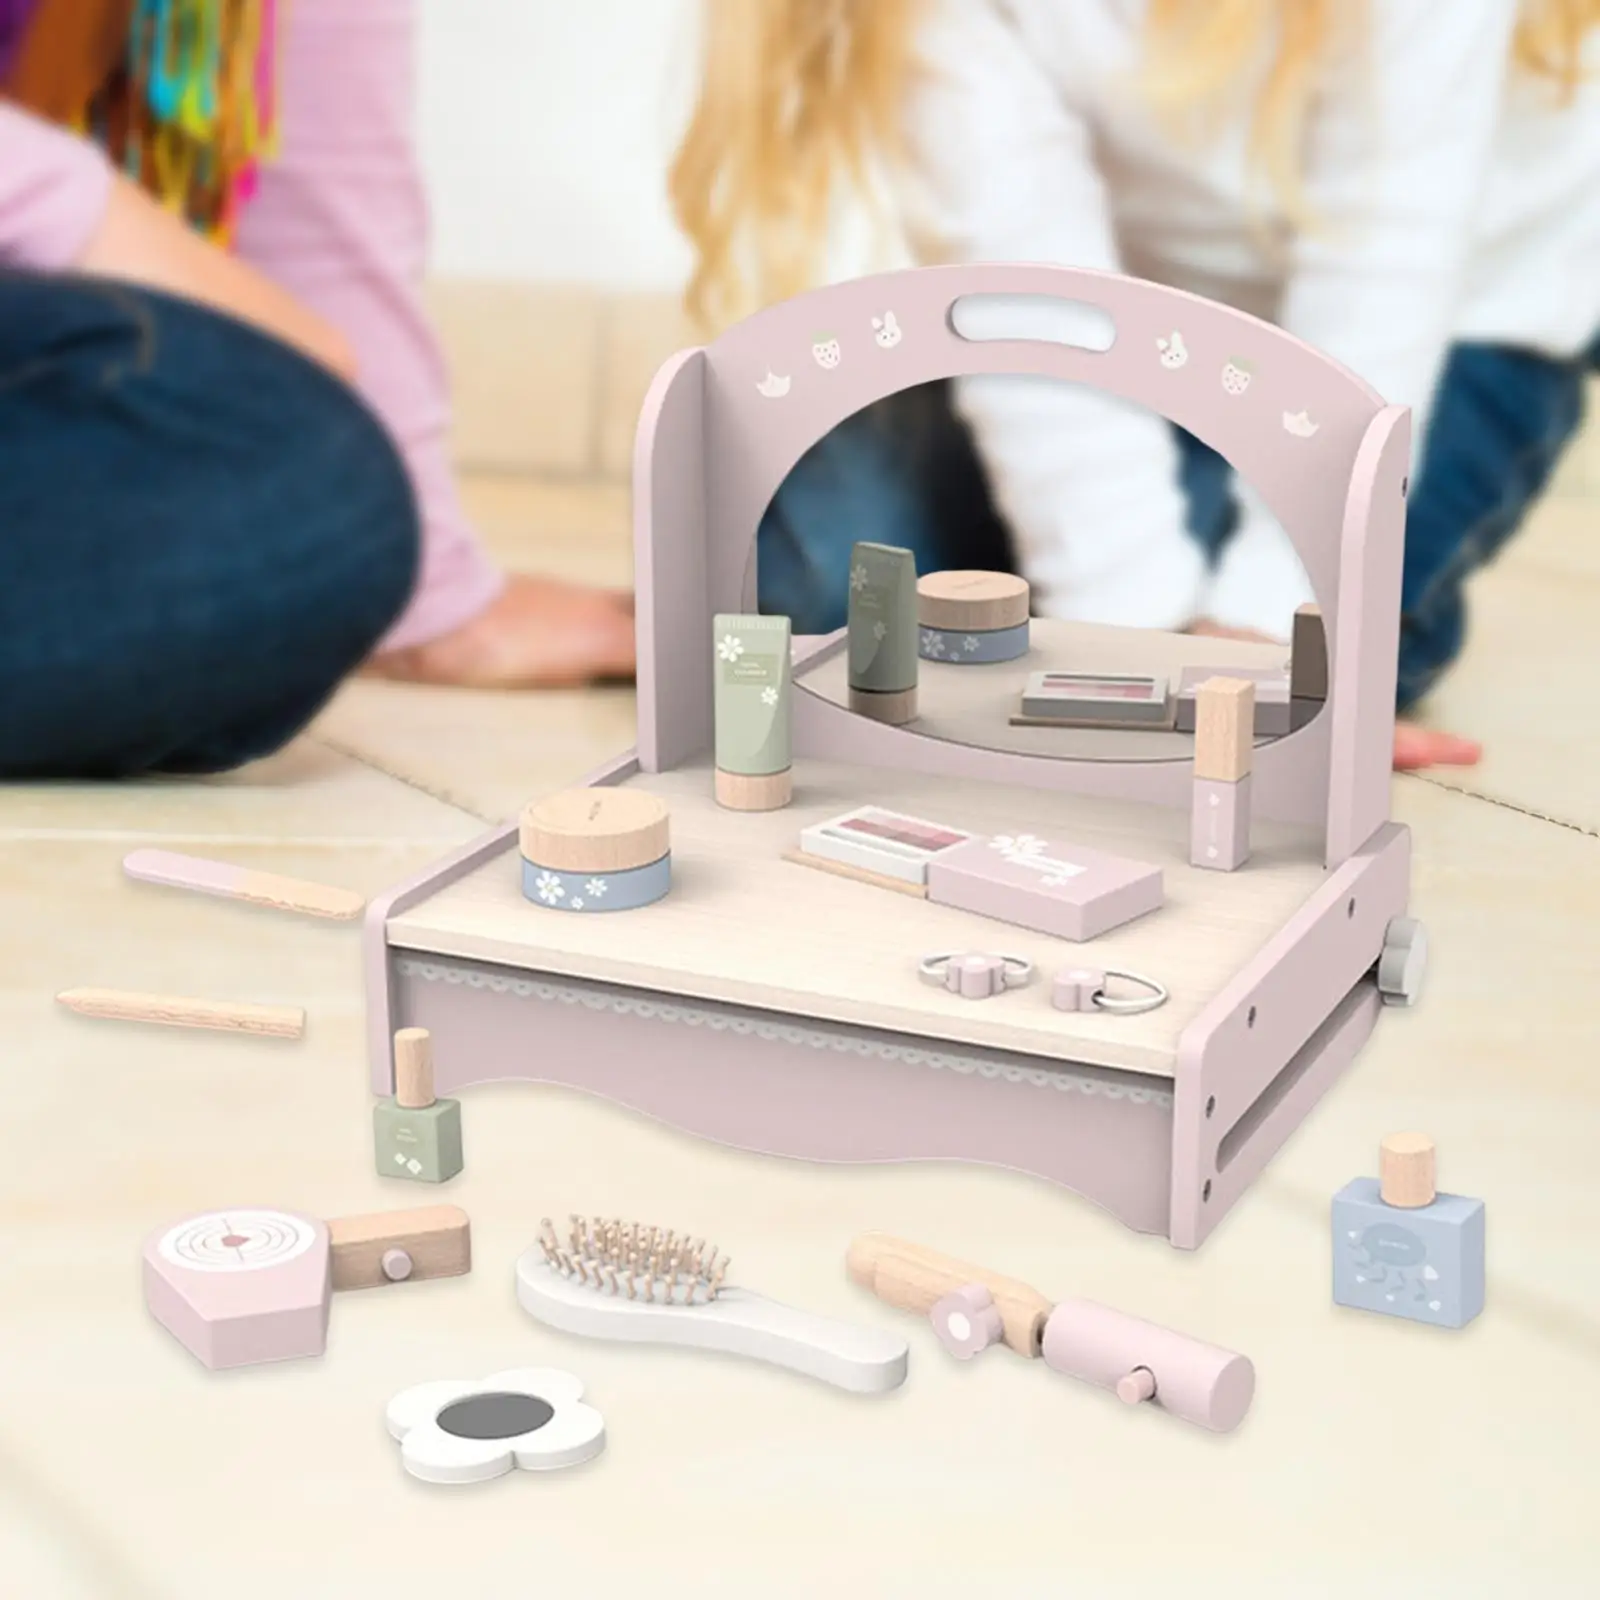 Wood Kids Makeup Sets ,Cosmetic Set ,Simulation Play Room with Pretend Makeup